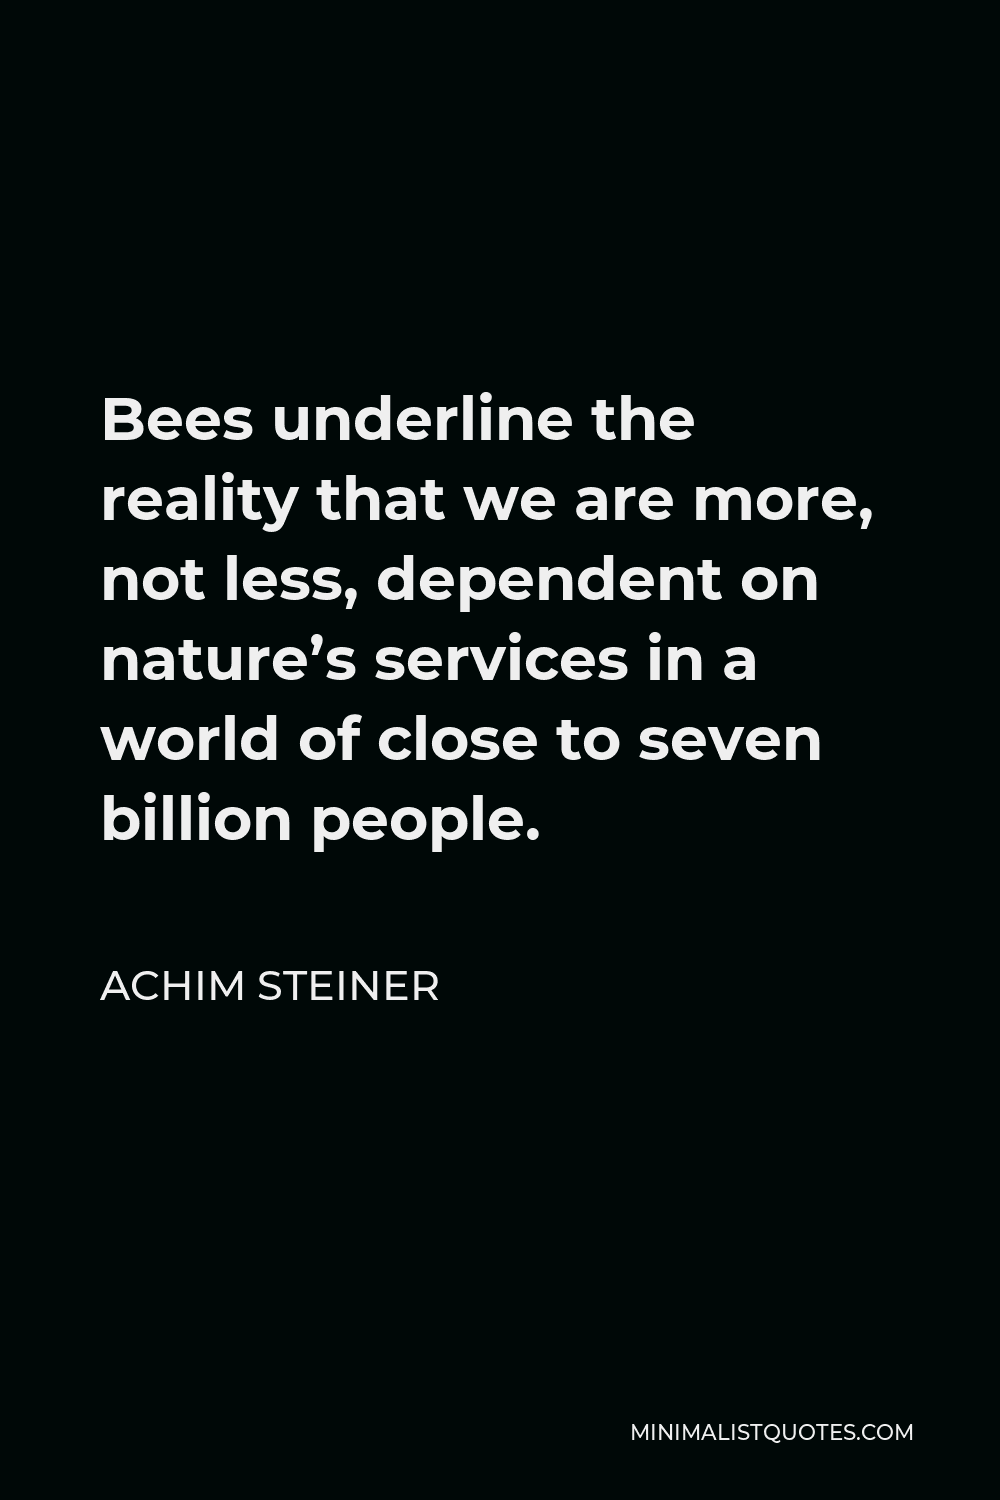 Achim Steiner Quote - Bees underline the reality that we are more, not less, dependent on nature’s services in a world of close to seven billion people.